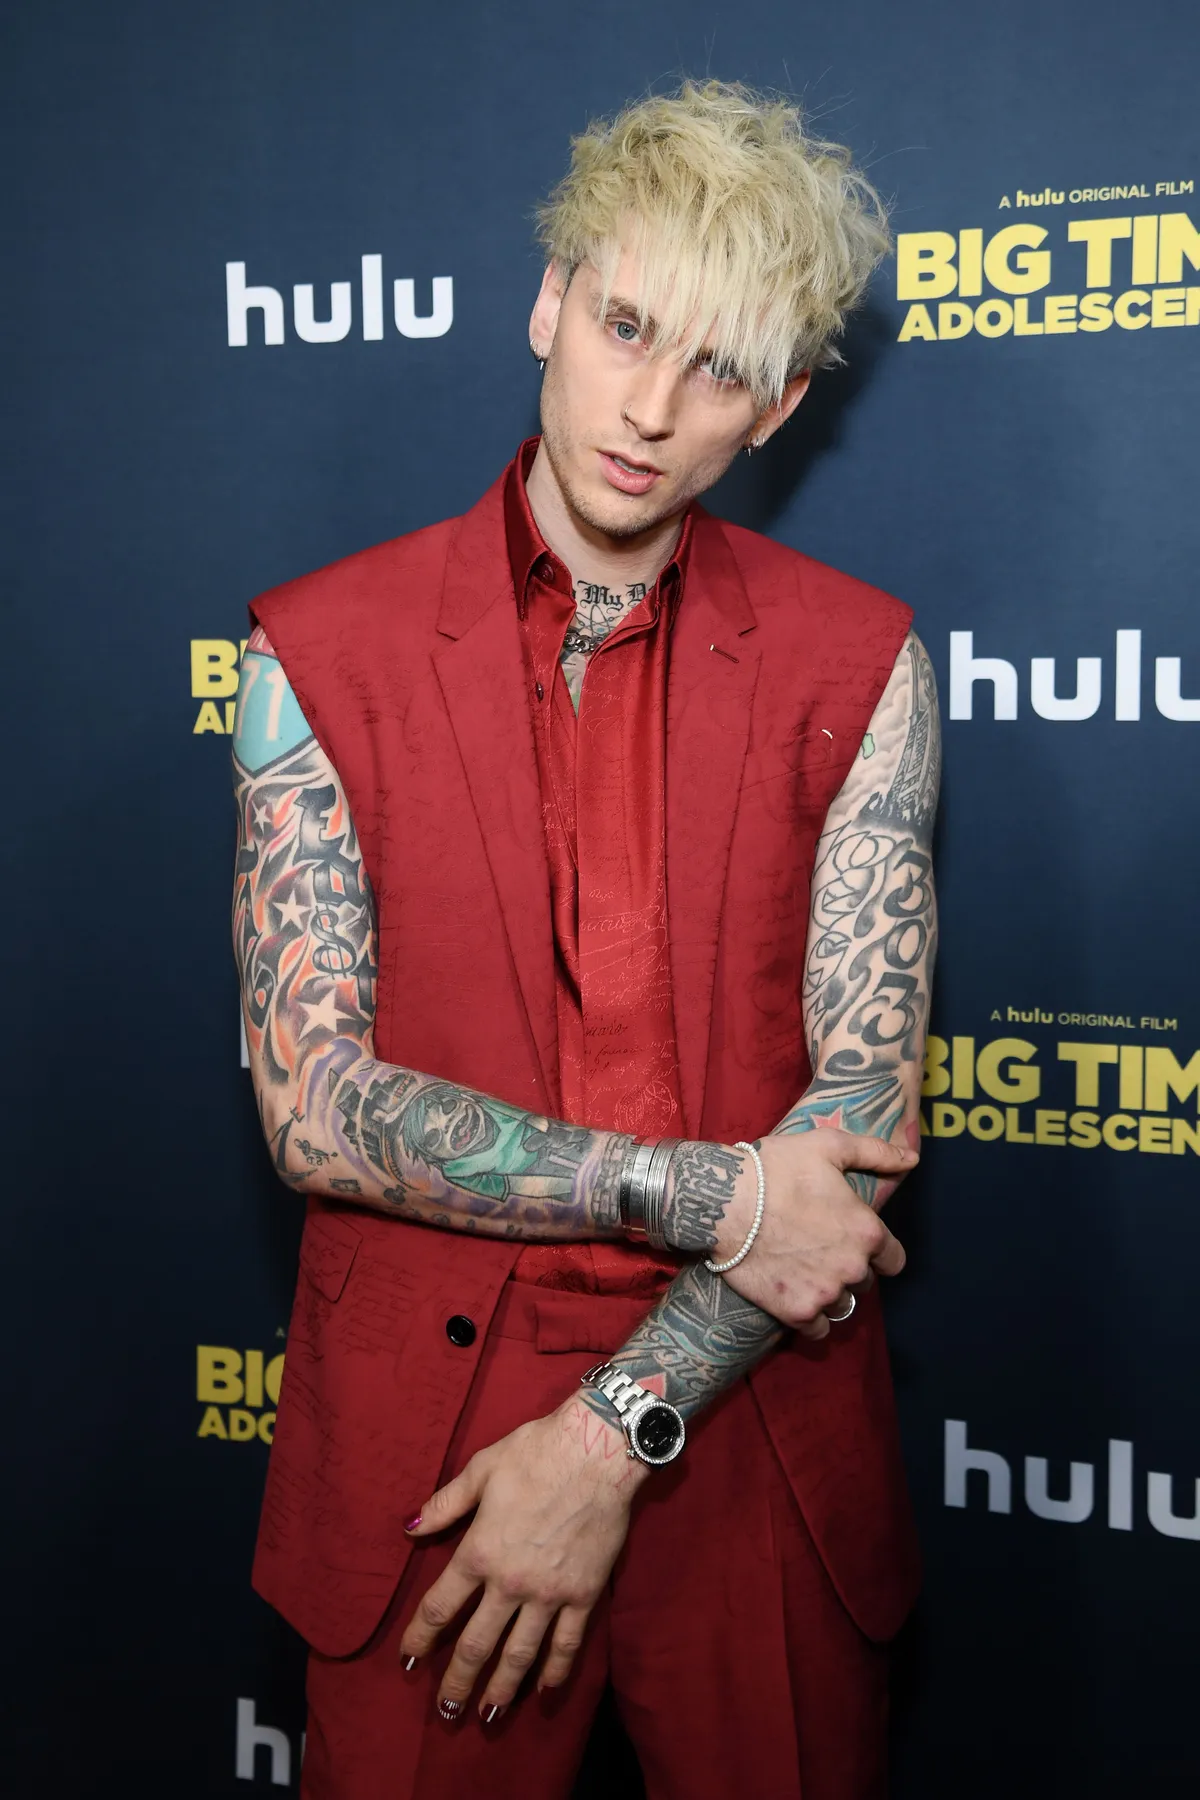 Machine Gun Kelly at the premiere of "Big Time Adolescence" in March 2020 in New York City. | Photo: Getty Images